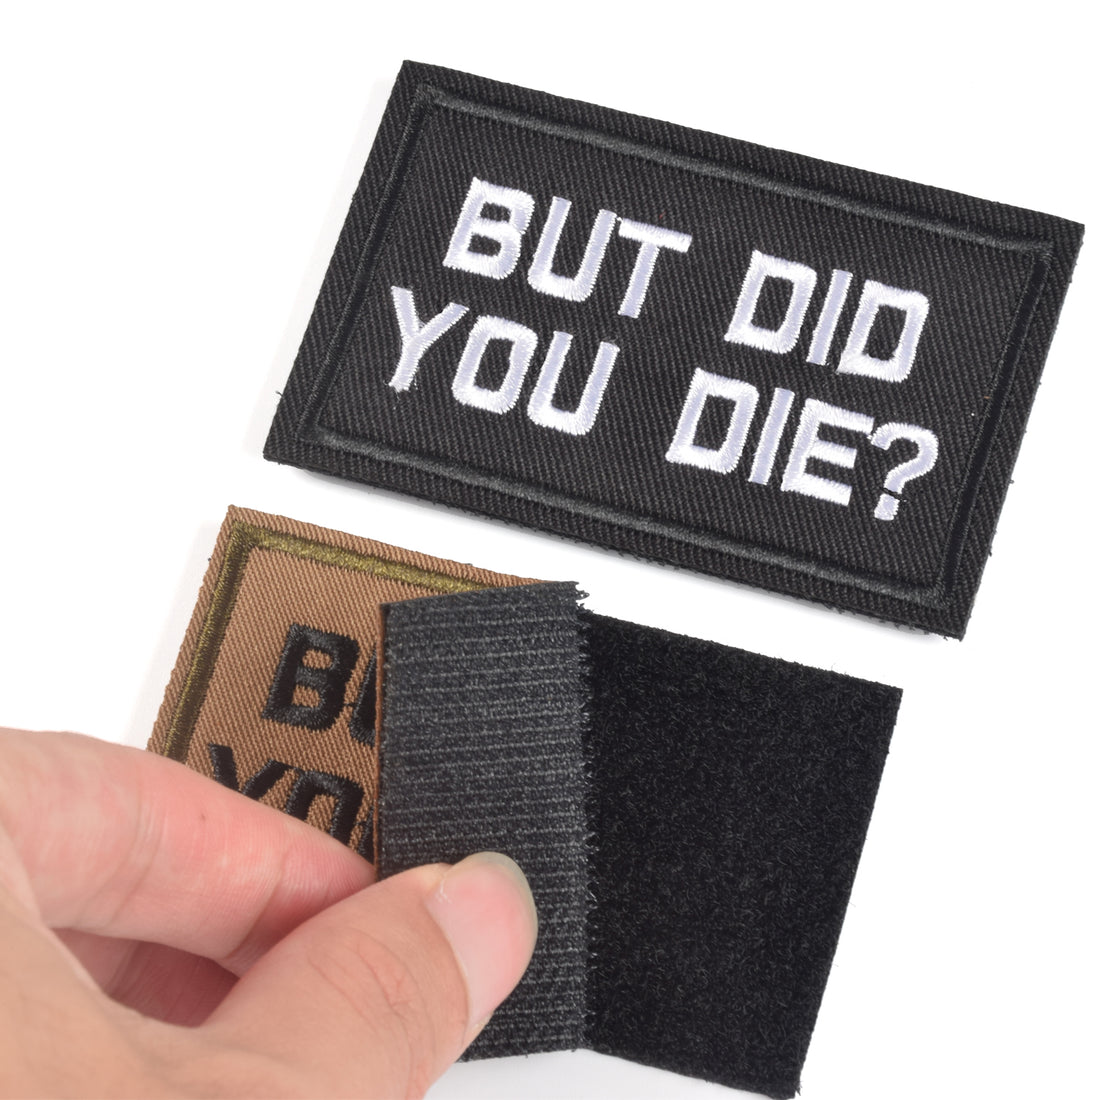 2 Pieces BUT DID YOU DIE Funny Tactical Clothing Accessory Backpack Armband Sticker Embroidery Decorative Patch, 2x3 inch